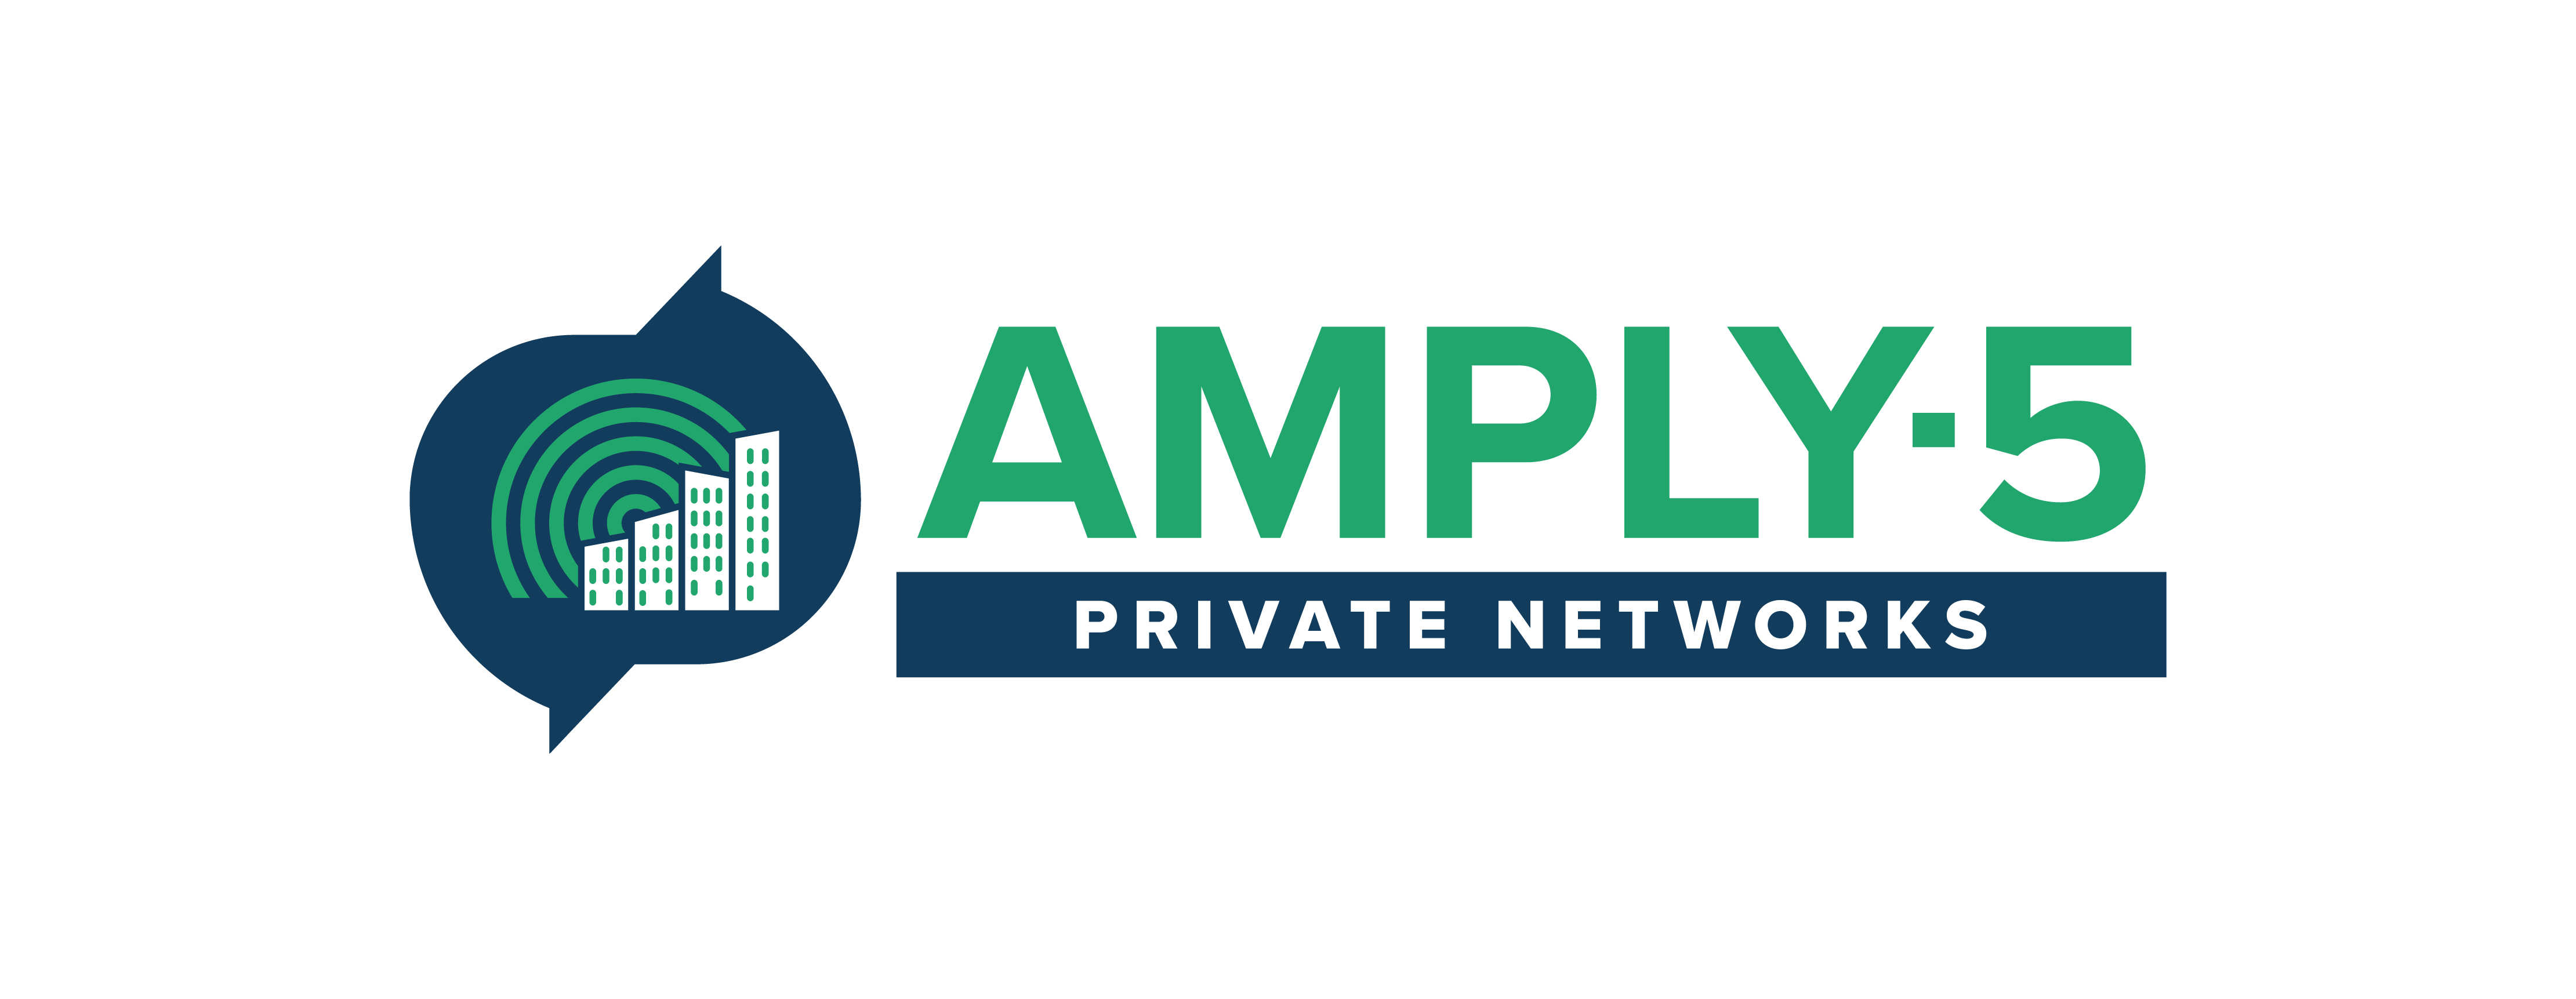 MBG Amply-5 Private Networks Launches, Enhancing 5G for Private Networks